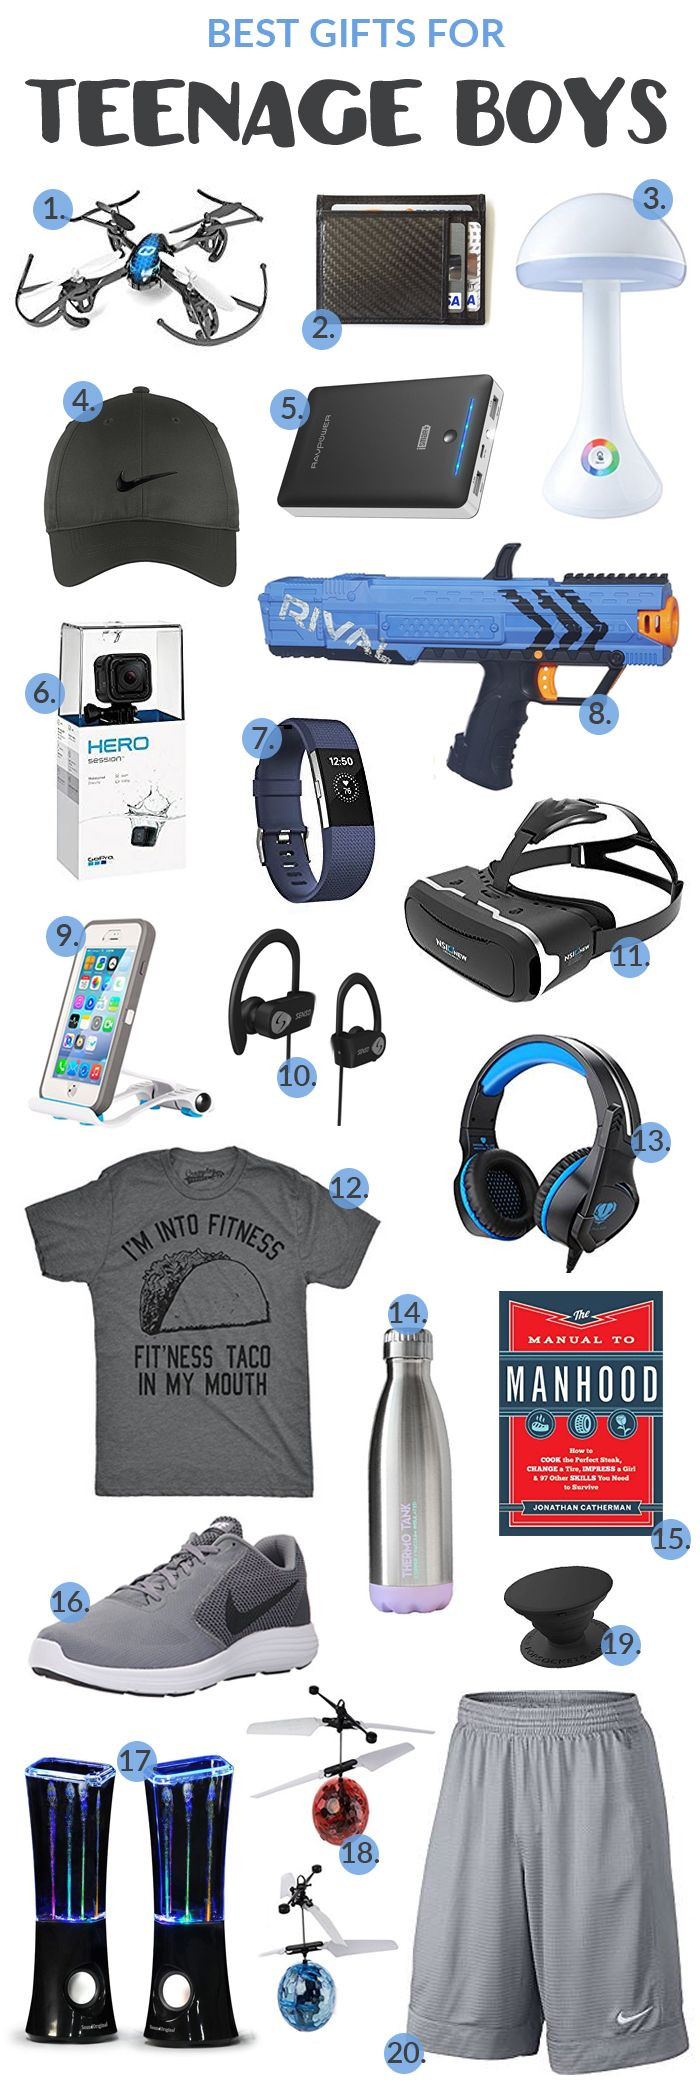 Christmas Gift Ideas For Teen Boys
 Best Gifts for Teenage Boys